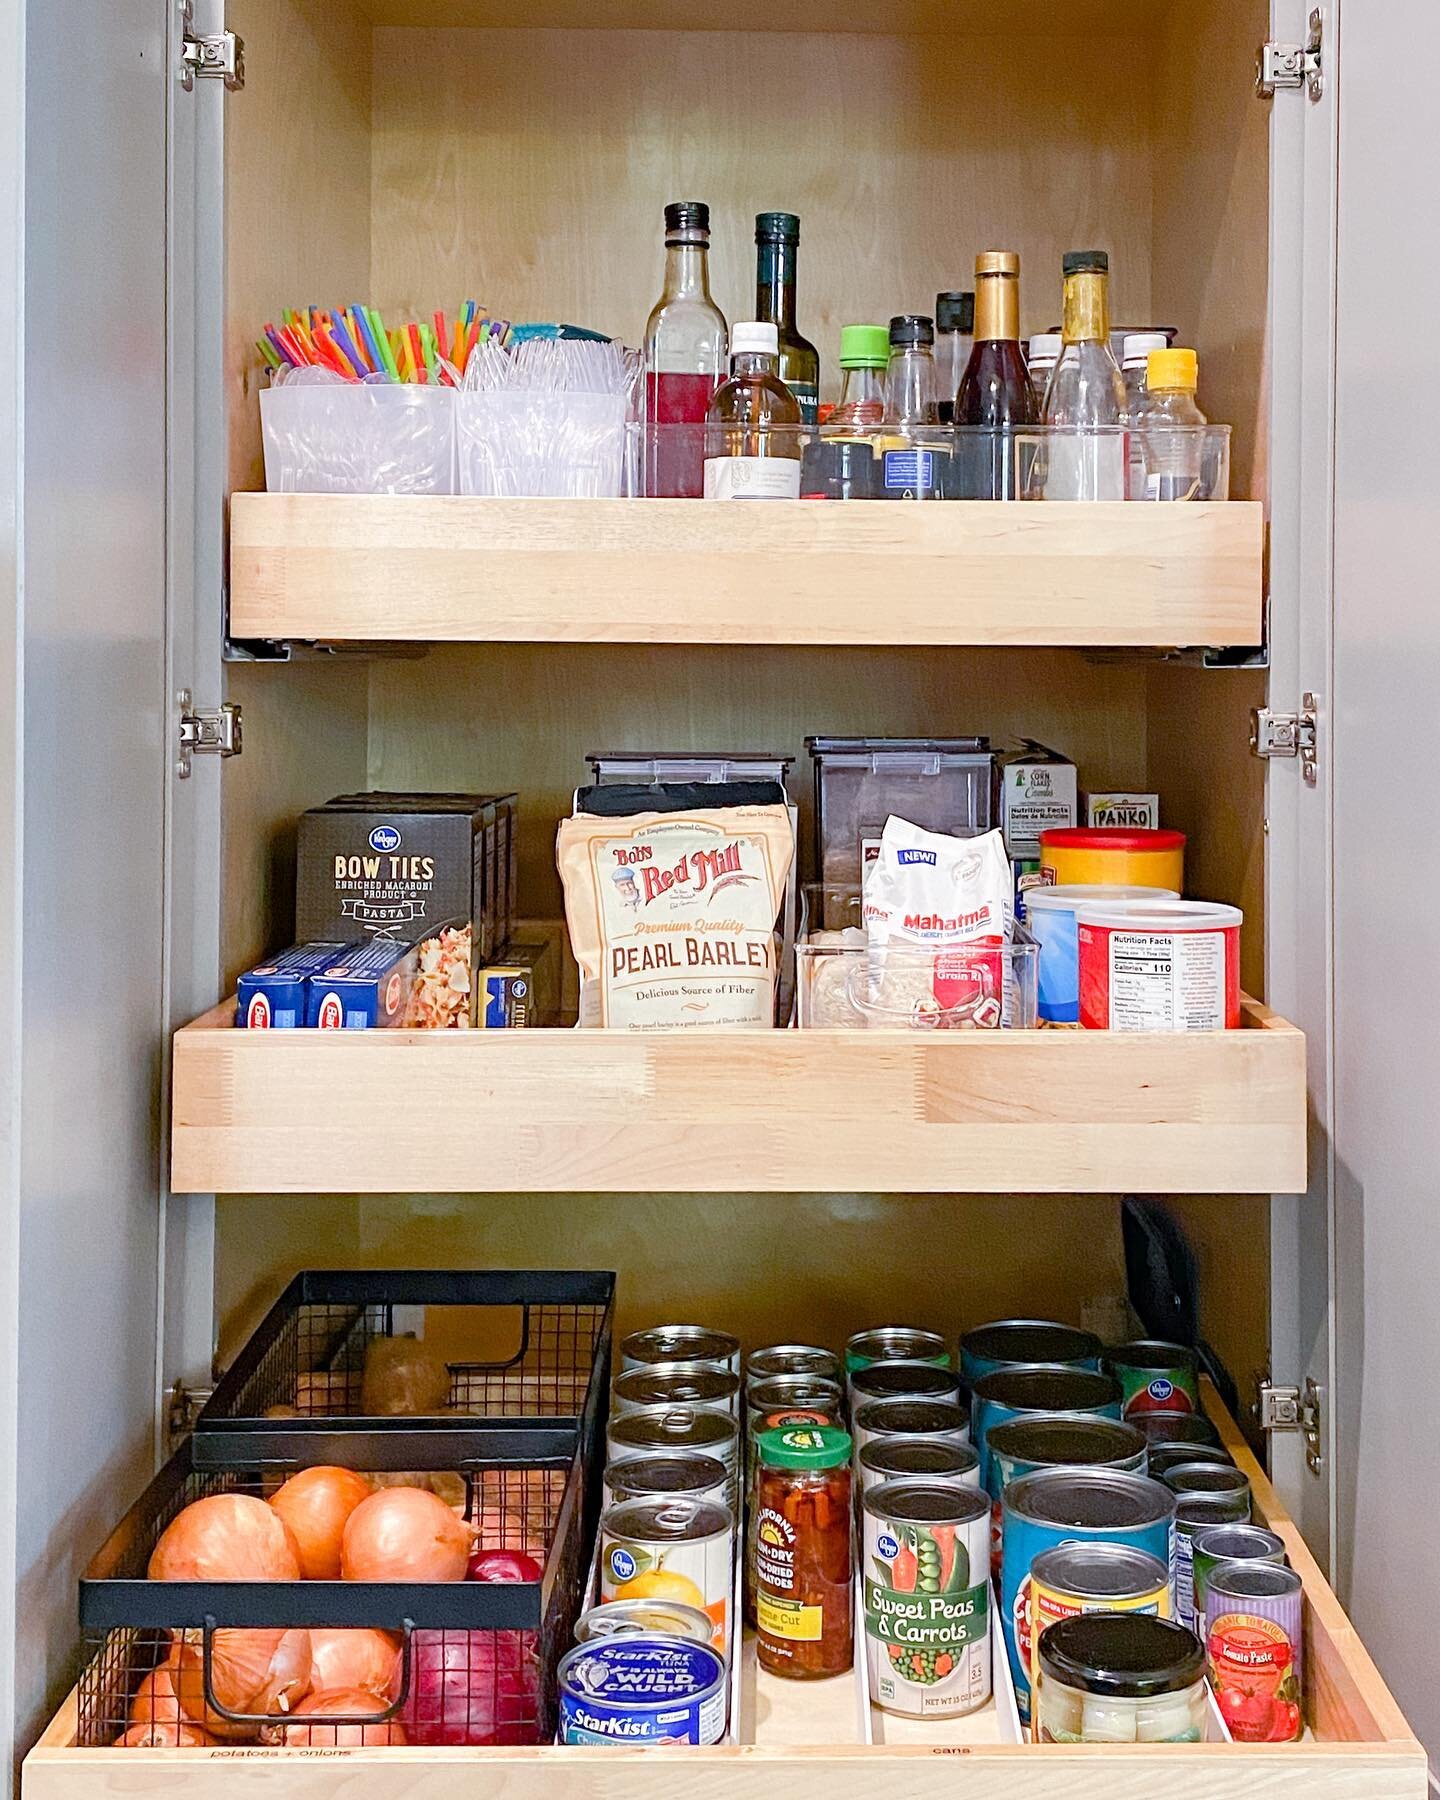 Some people are quick to bemoan a deep pantry or resign it to a dumping ground. But fear not! Pop some deep drawer bins in there, along with some dividers, and you have a beautiful, fully functioning pantry.

#pantryorganization #pantrygoals